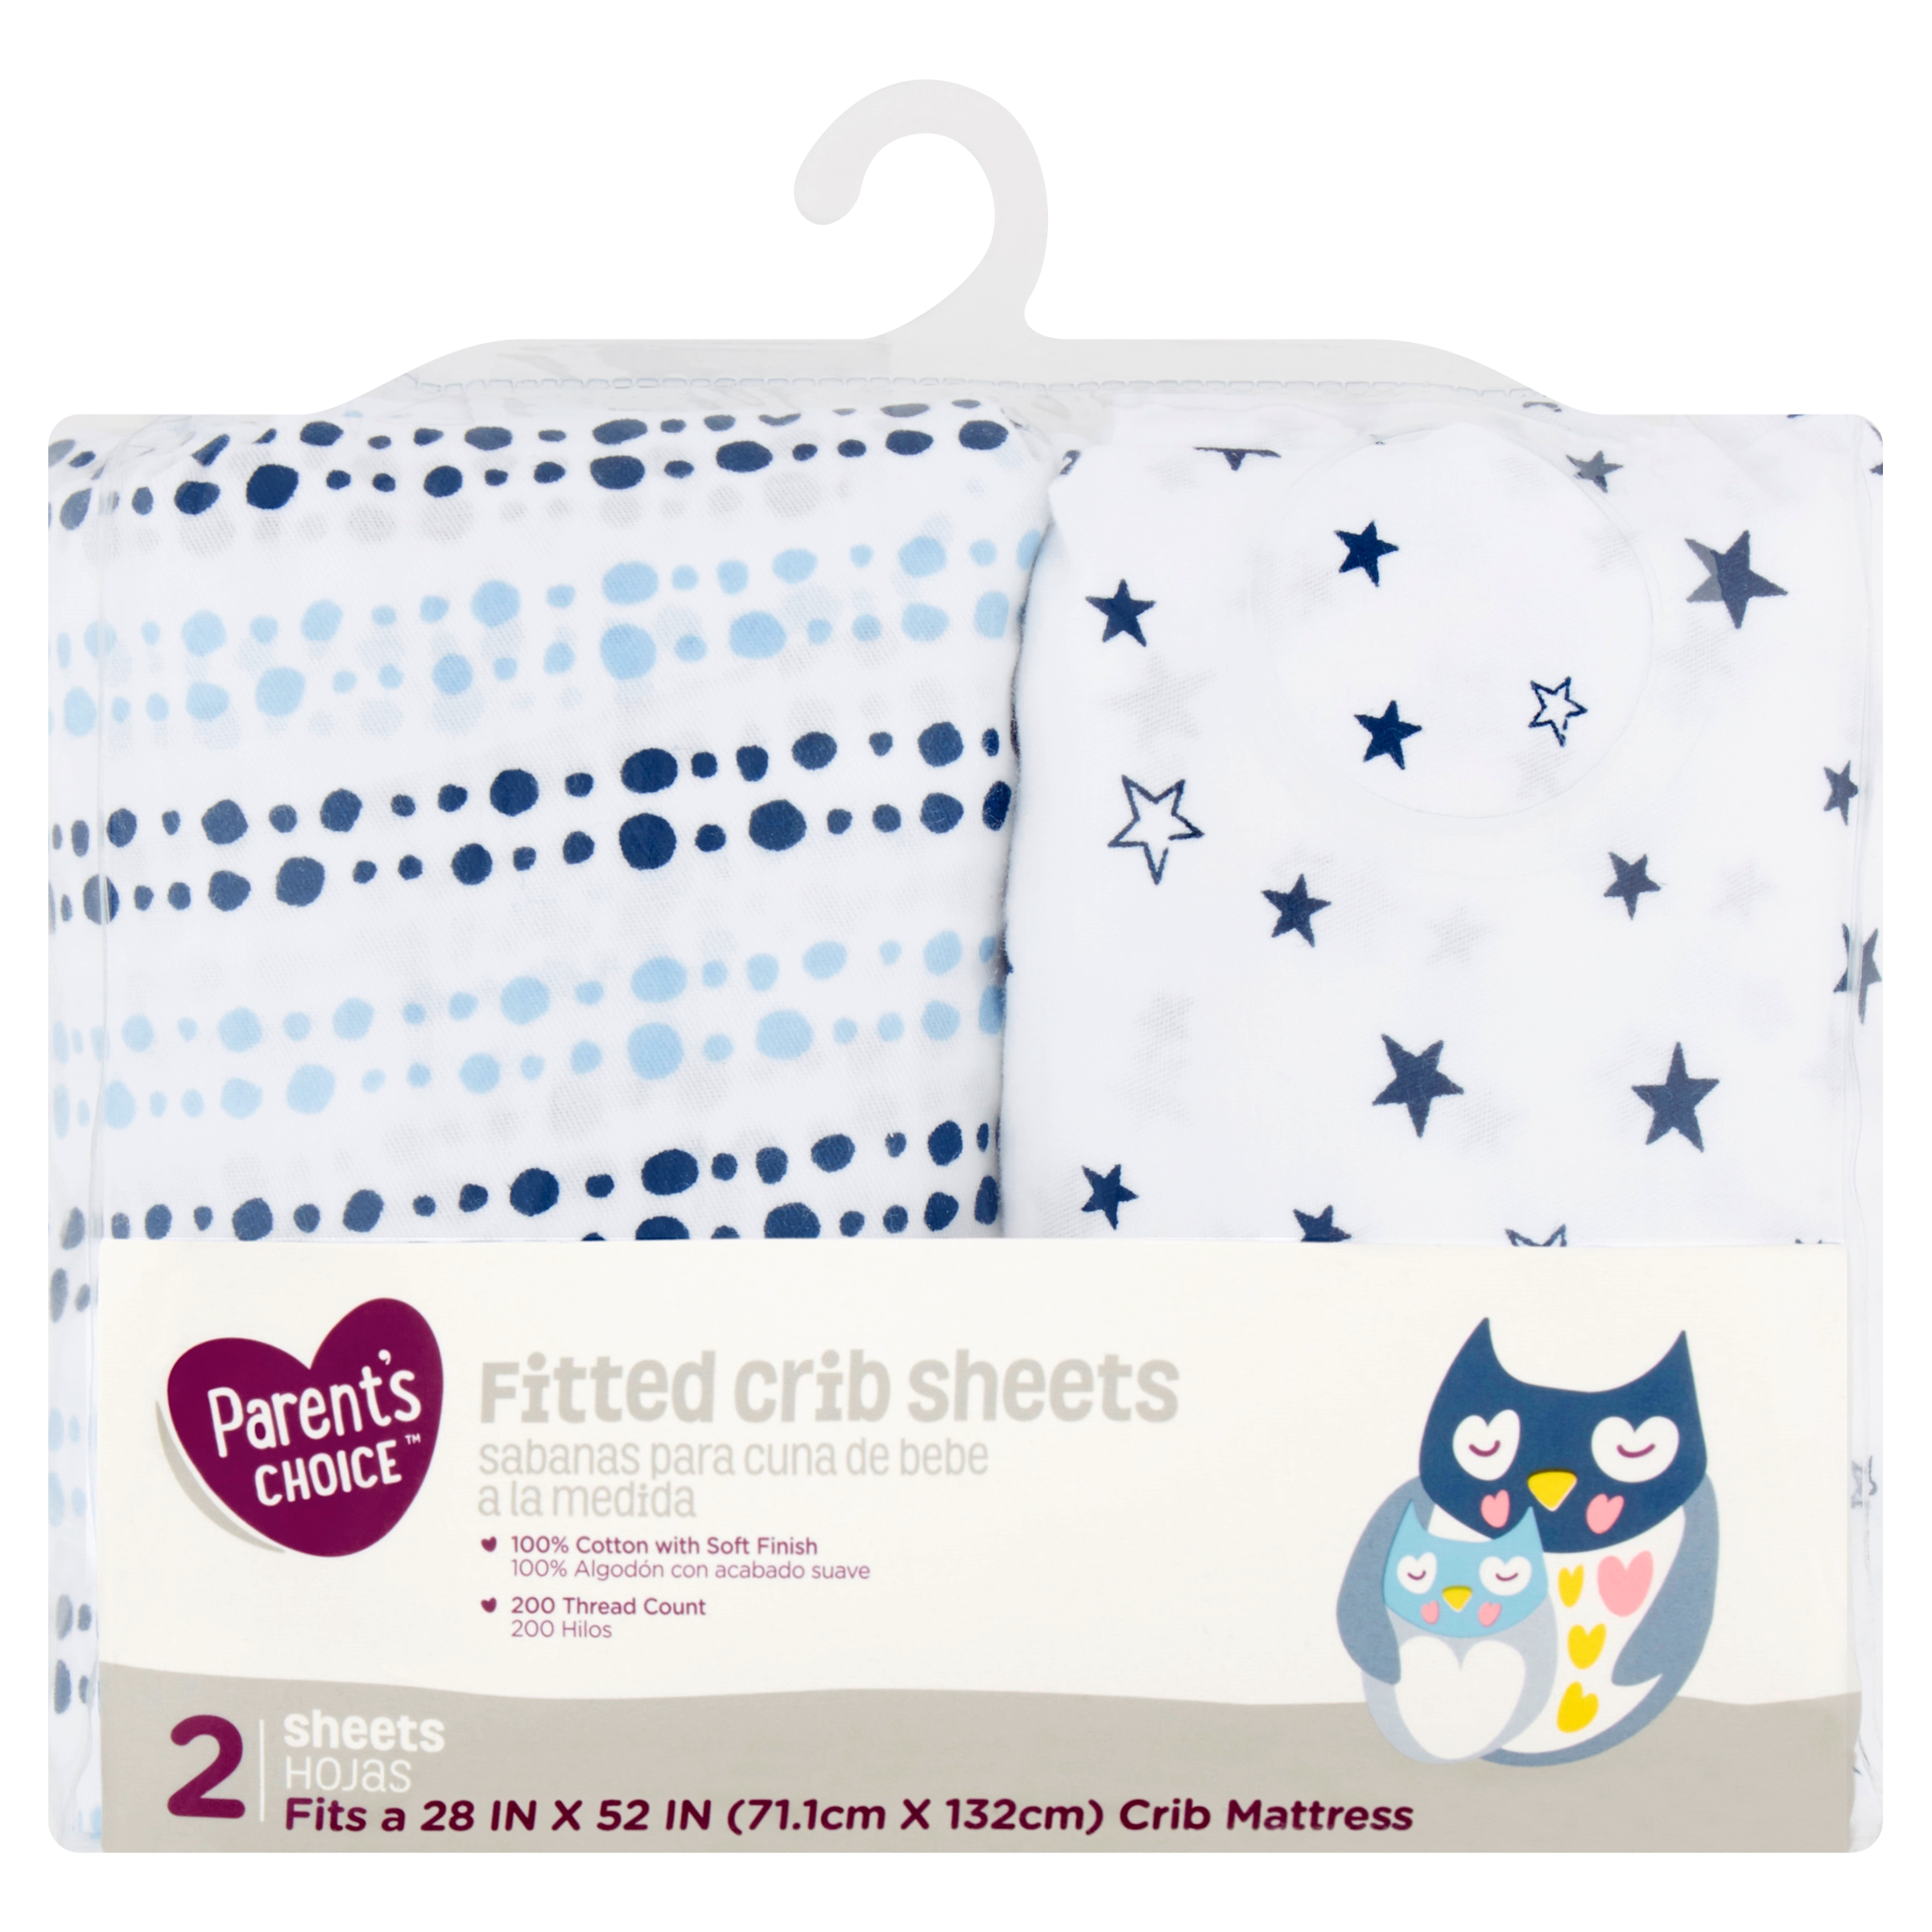 Parent's Choice 100% Cotton Fitted Crib Sheets, Blue Star 2pk - image 1 of 6